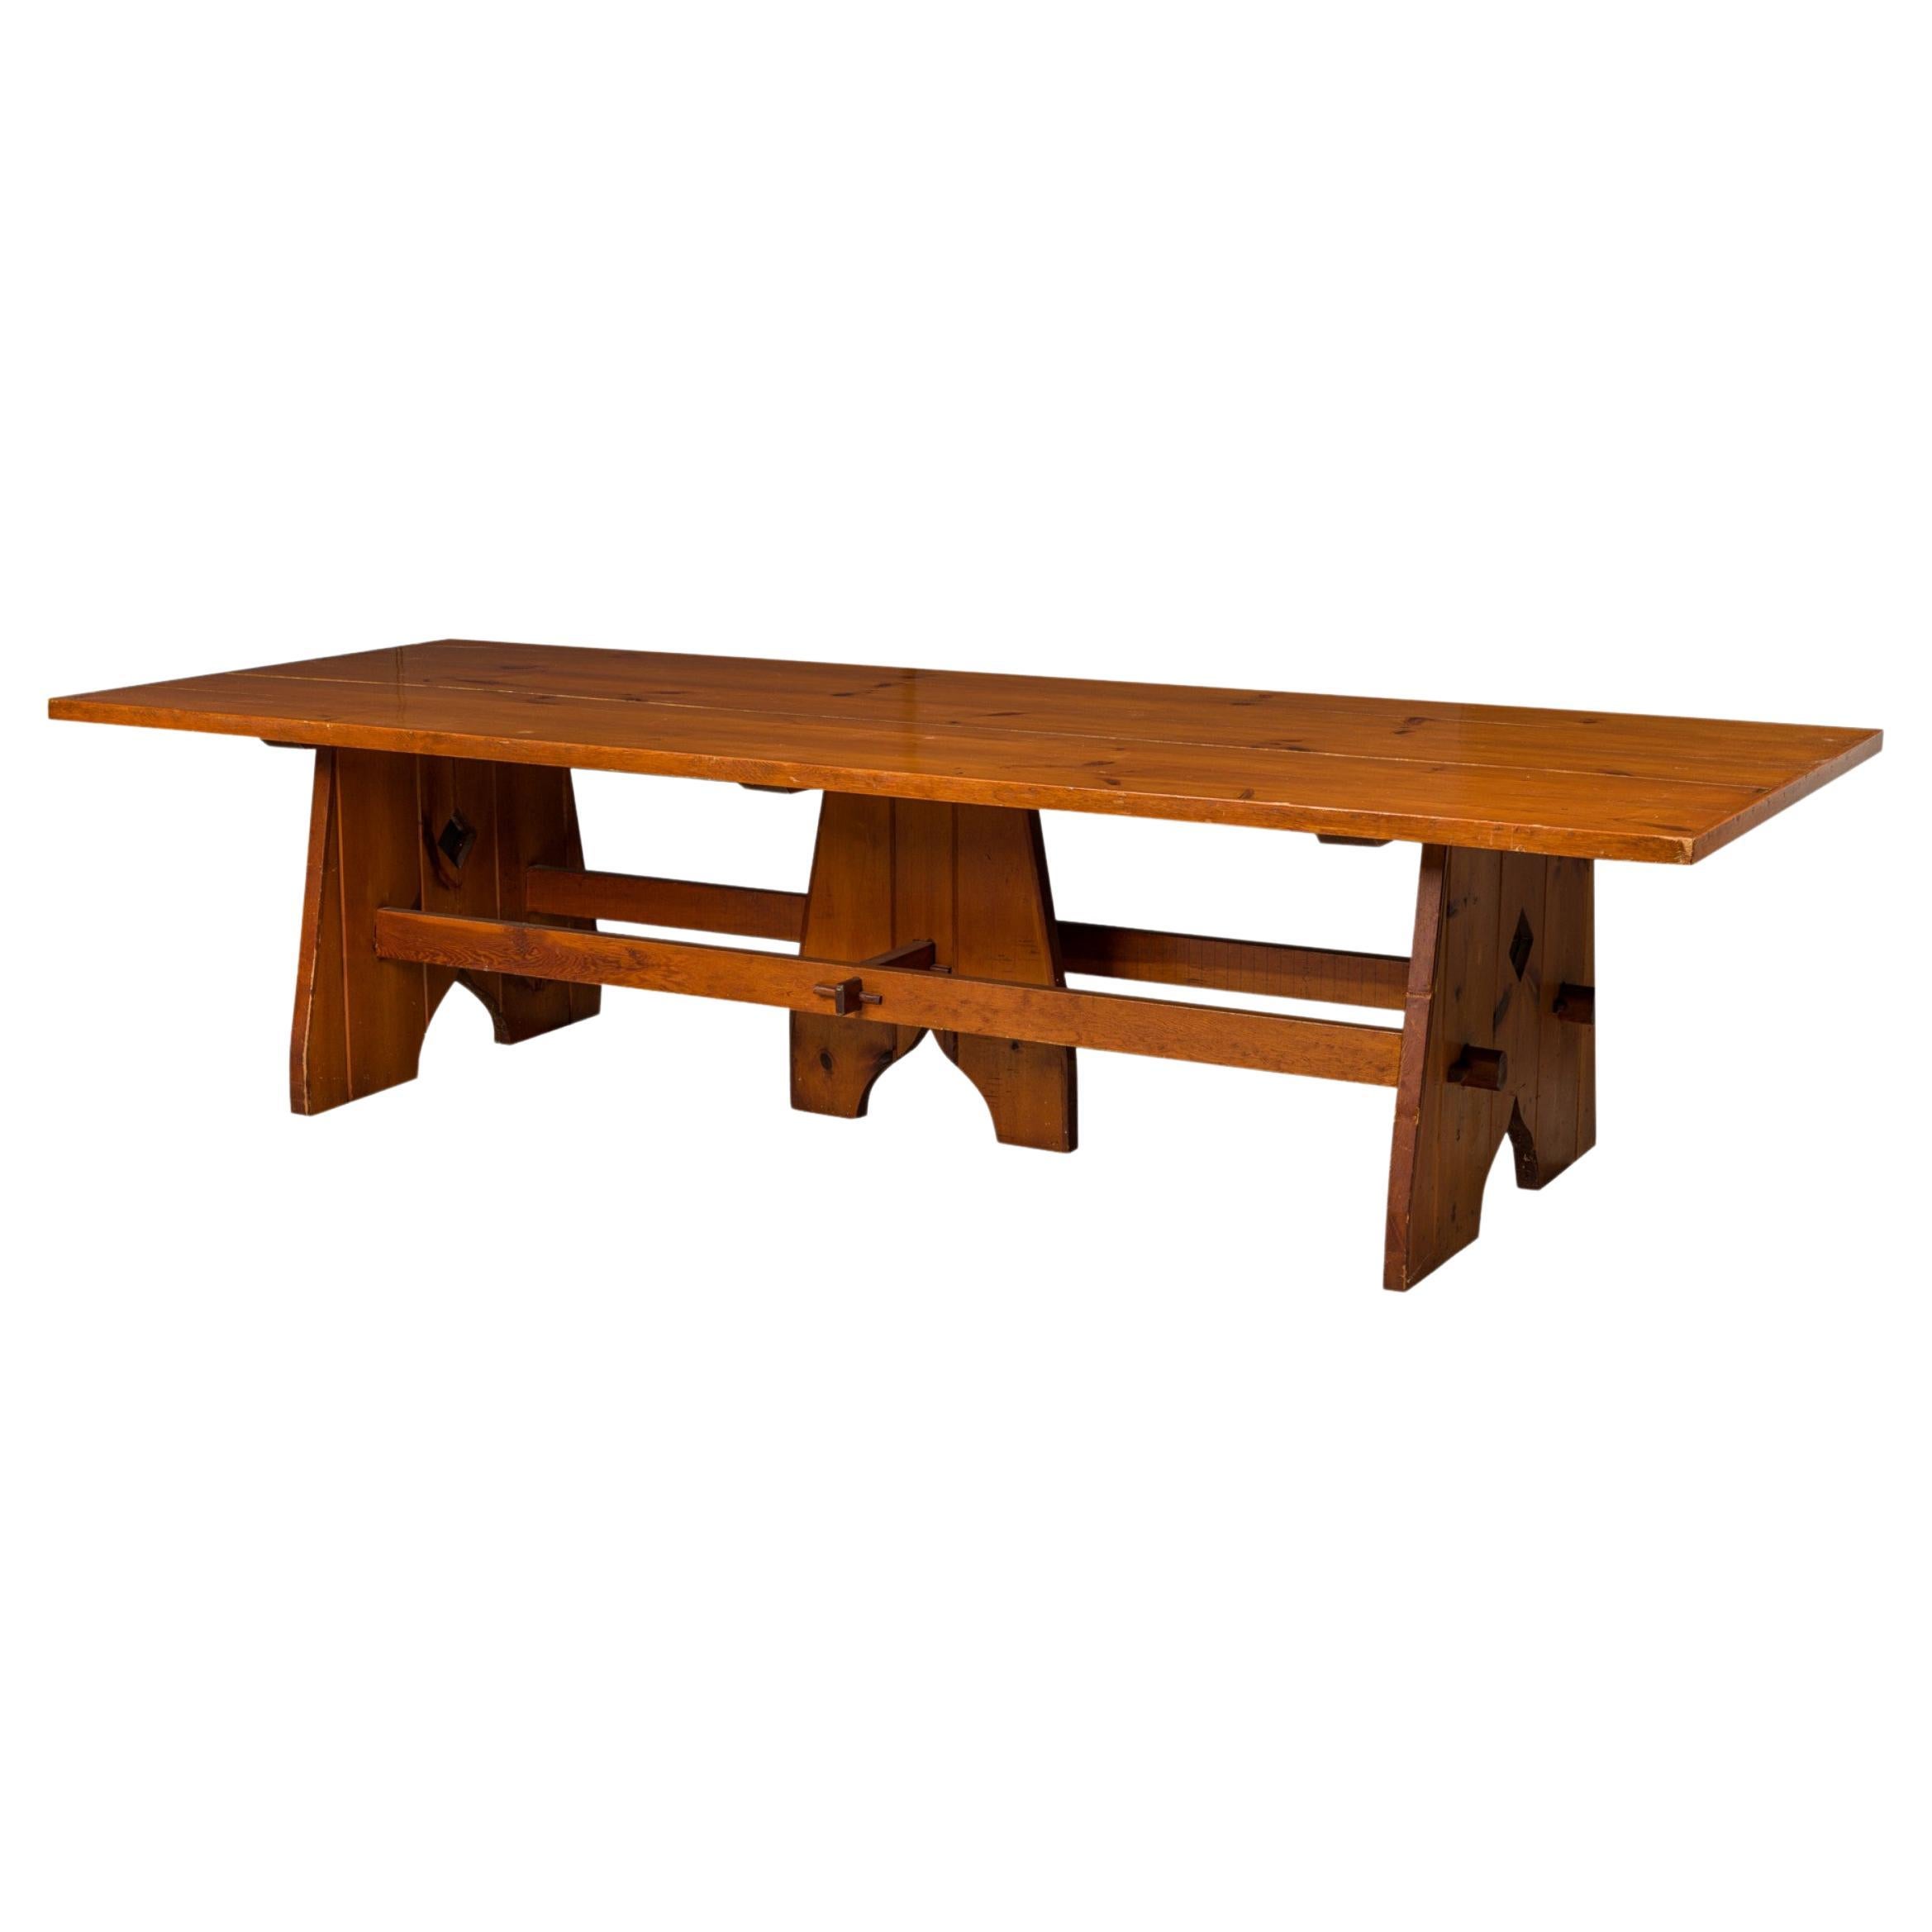 Rustic Adirondack Style Large Rectangular Dining / Conference Table